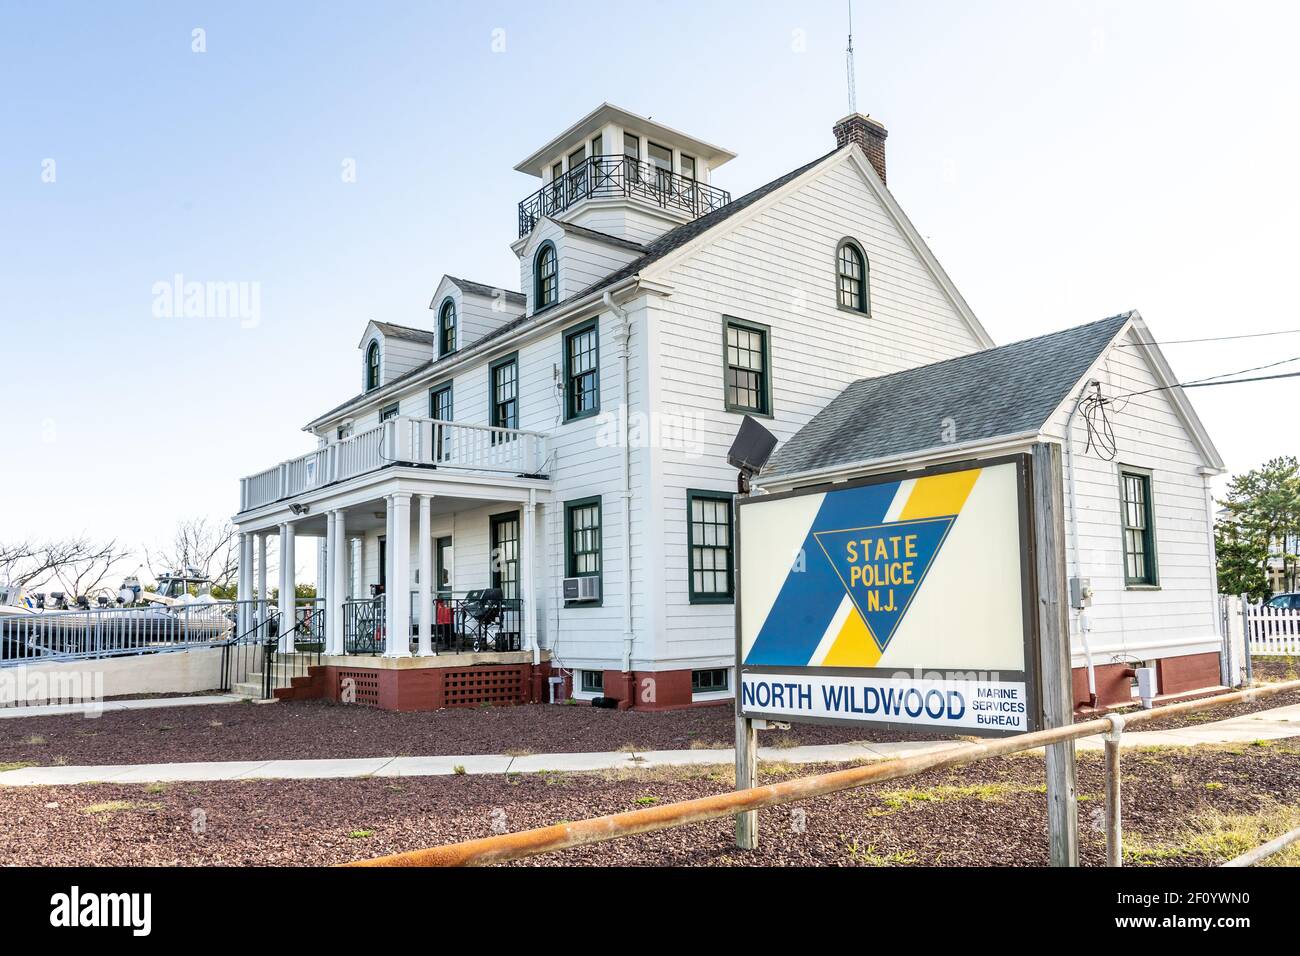 North Wildwood, NJ - Oct. 31, 2020: Station for the Marine Services Bureau of the NJ State Police addresses boating issues, fish & game laws, search & Stock Photo